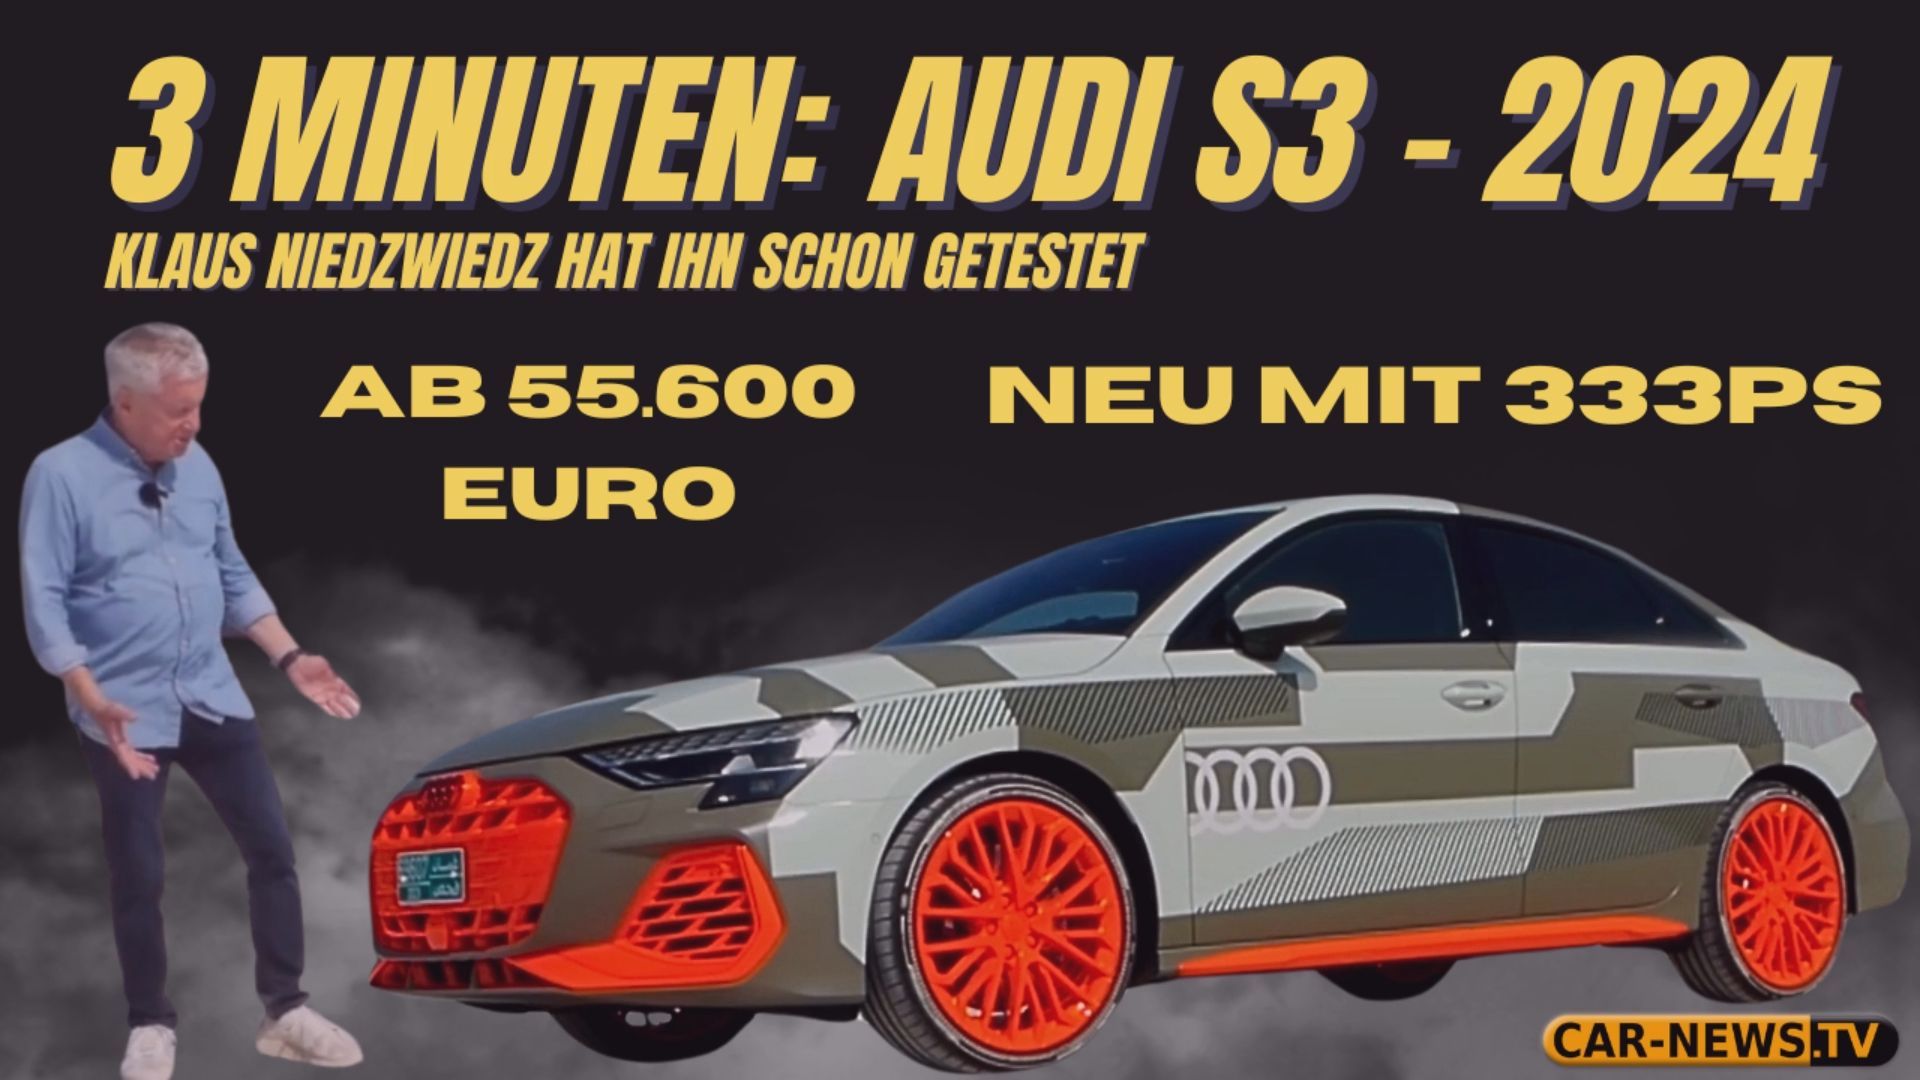 3 minutes Audi S3 - Prototype 2024 - Now with 333 hp, new looks and many optimizations!